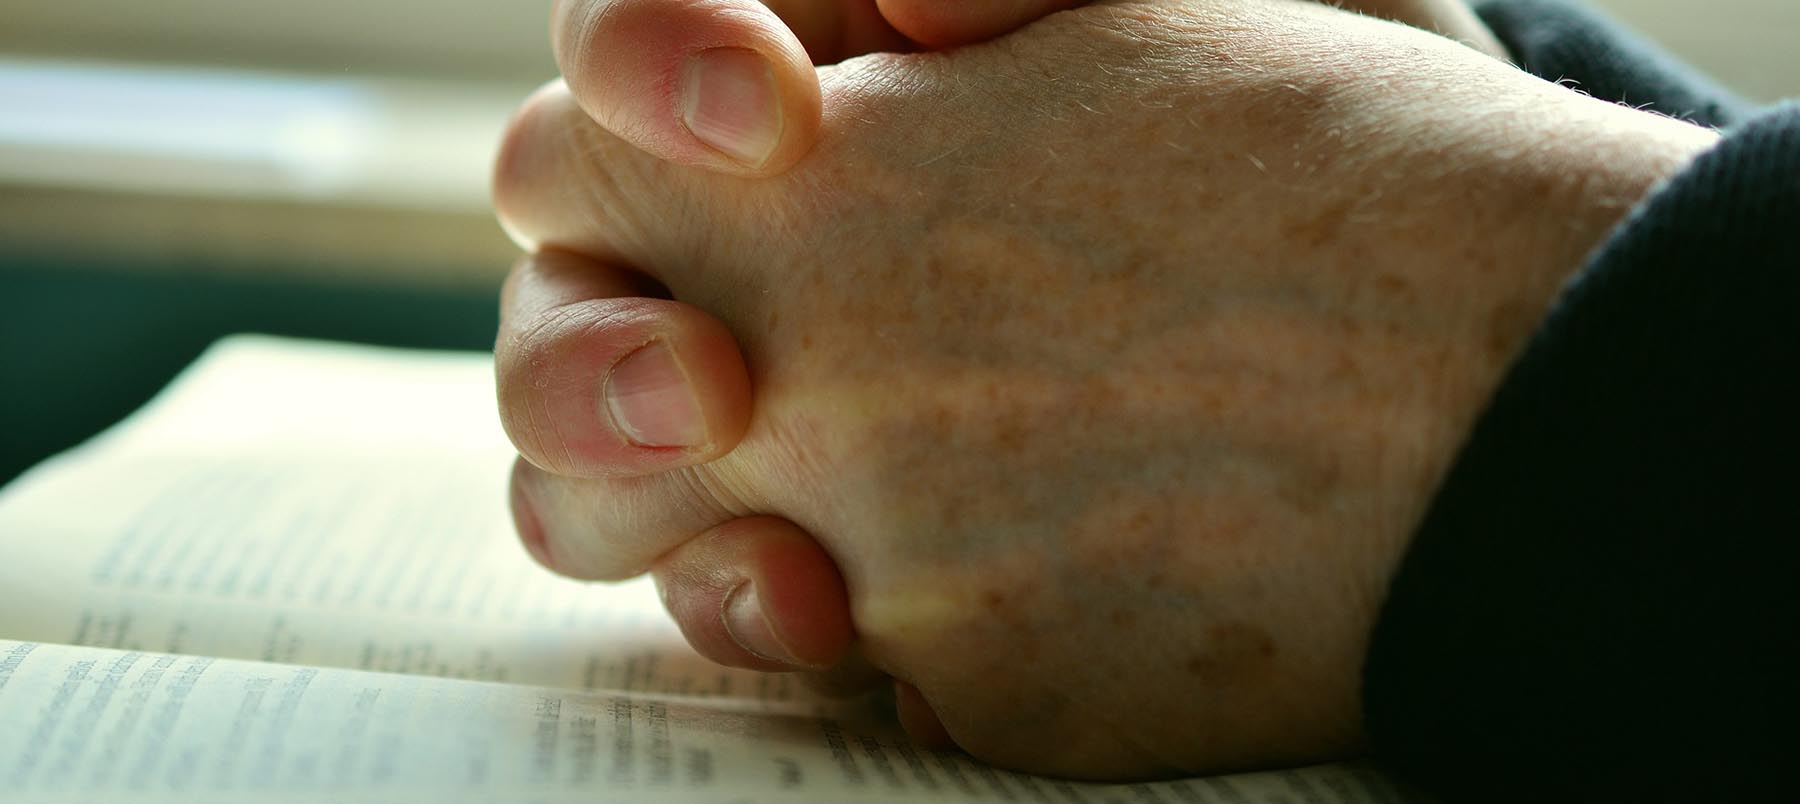 Hands clutched in prayer over an open bible